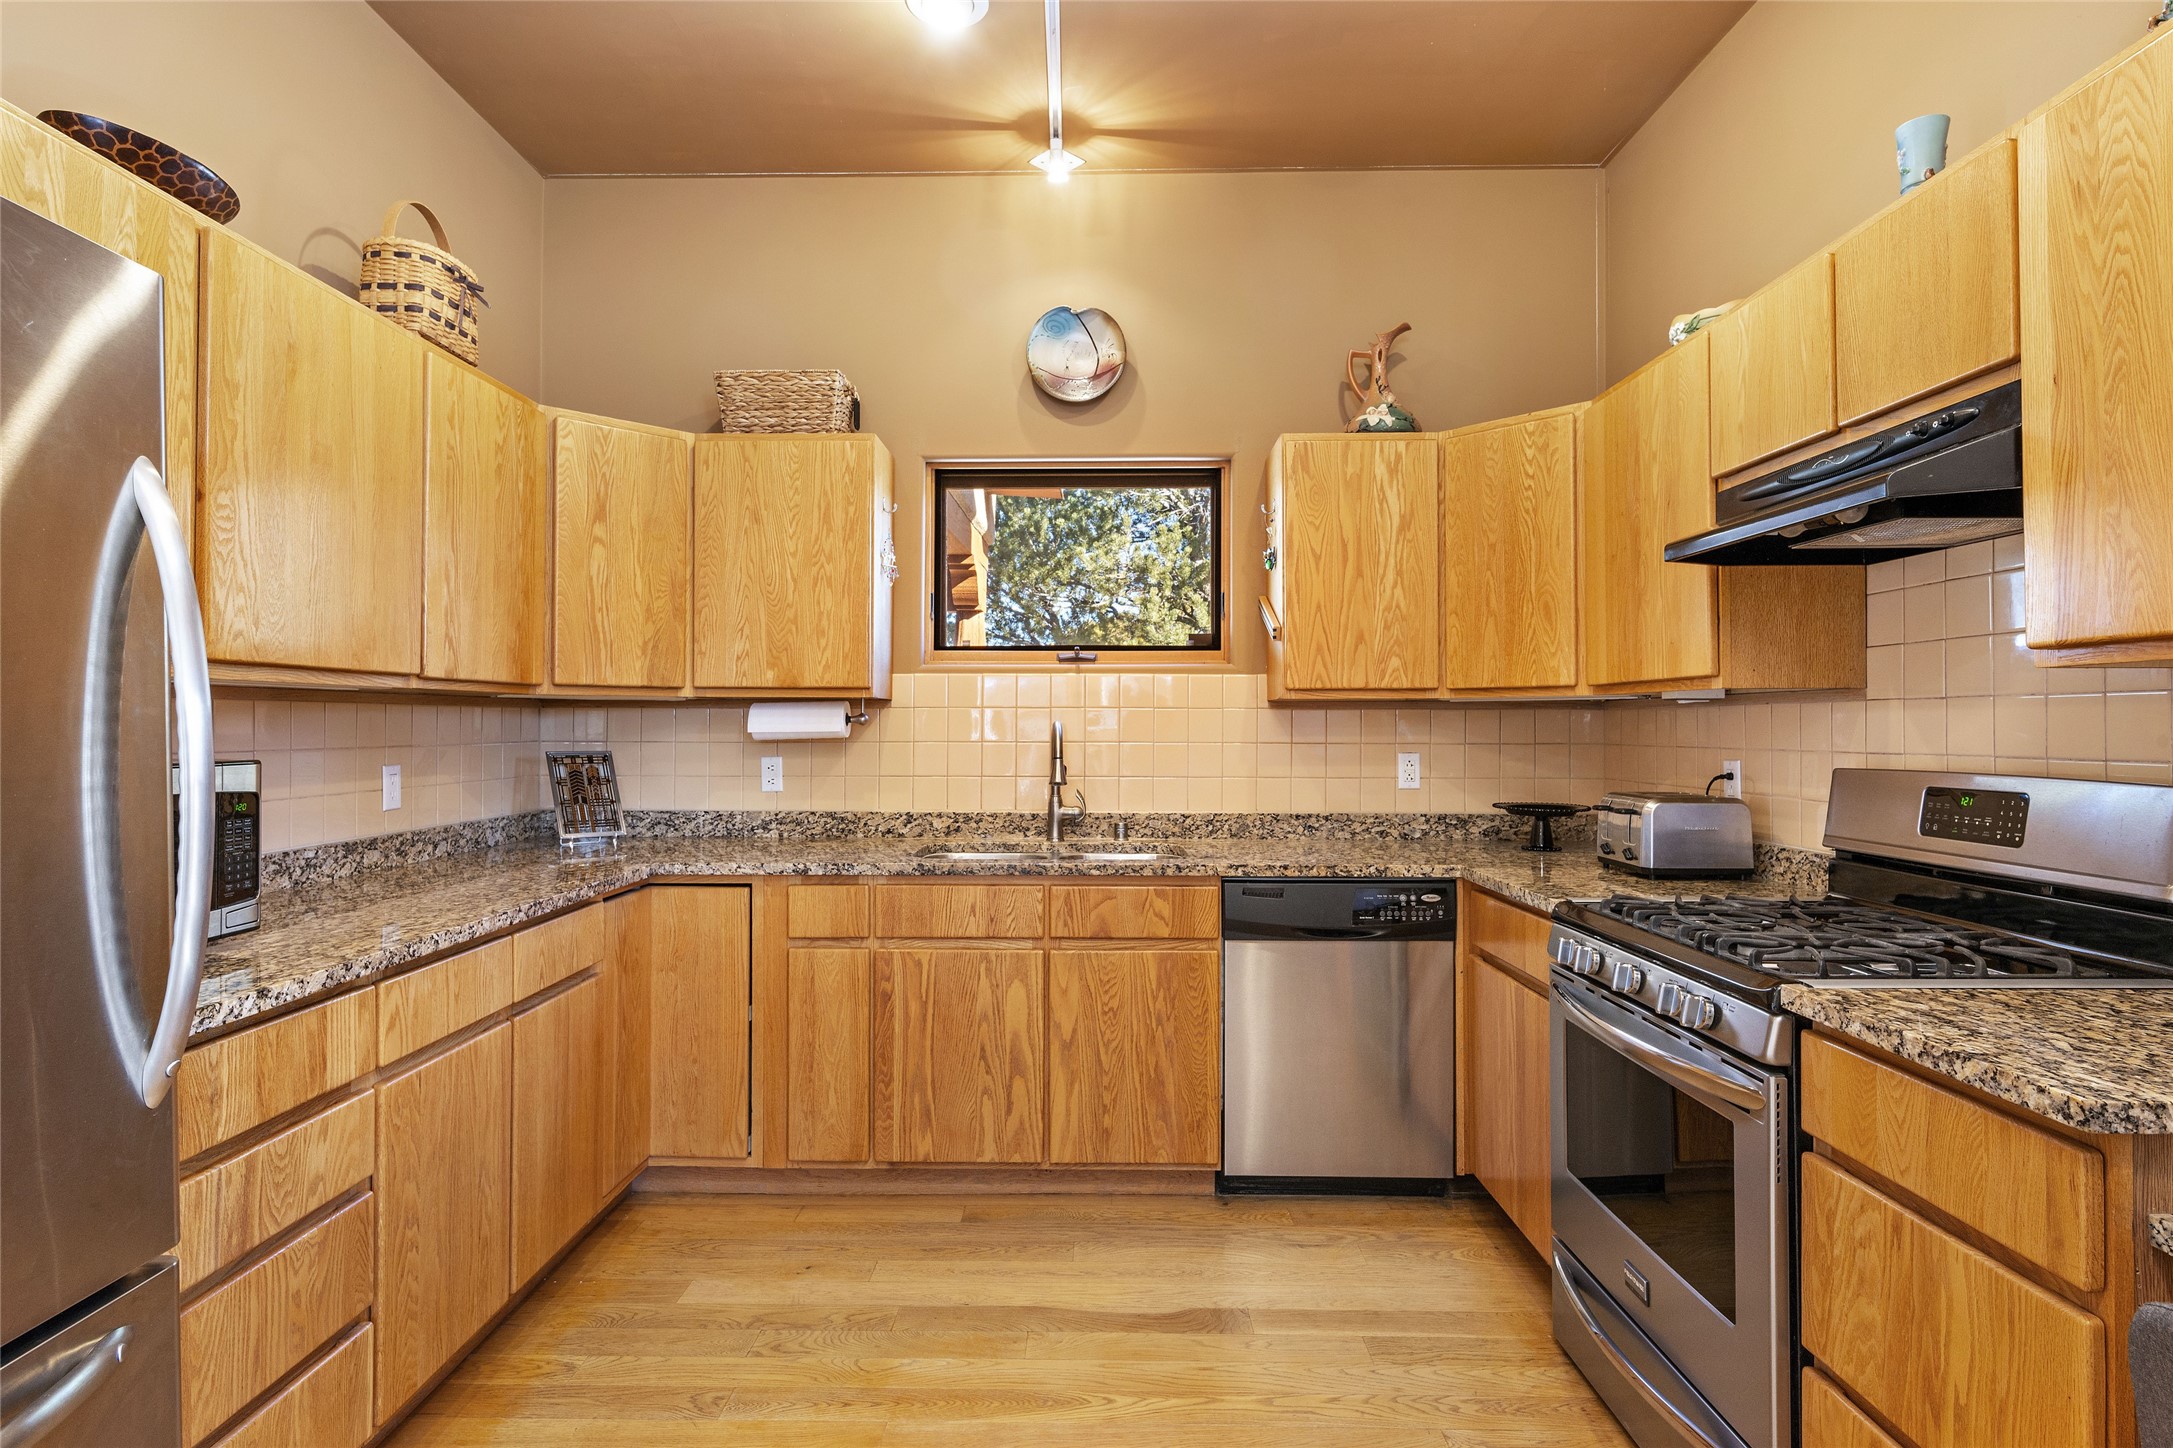 Wonderful Kitchen with Stainless Steel appliances with lots of counter space